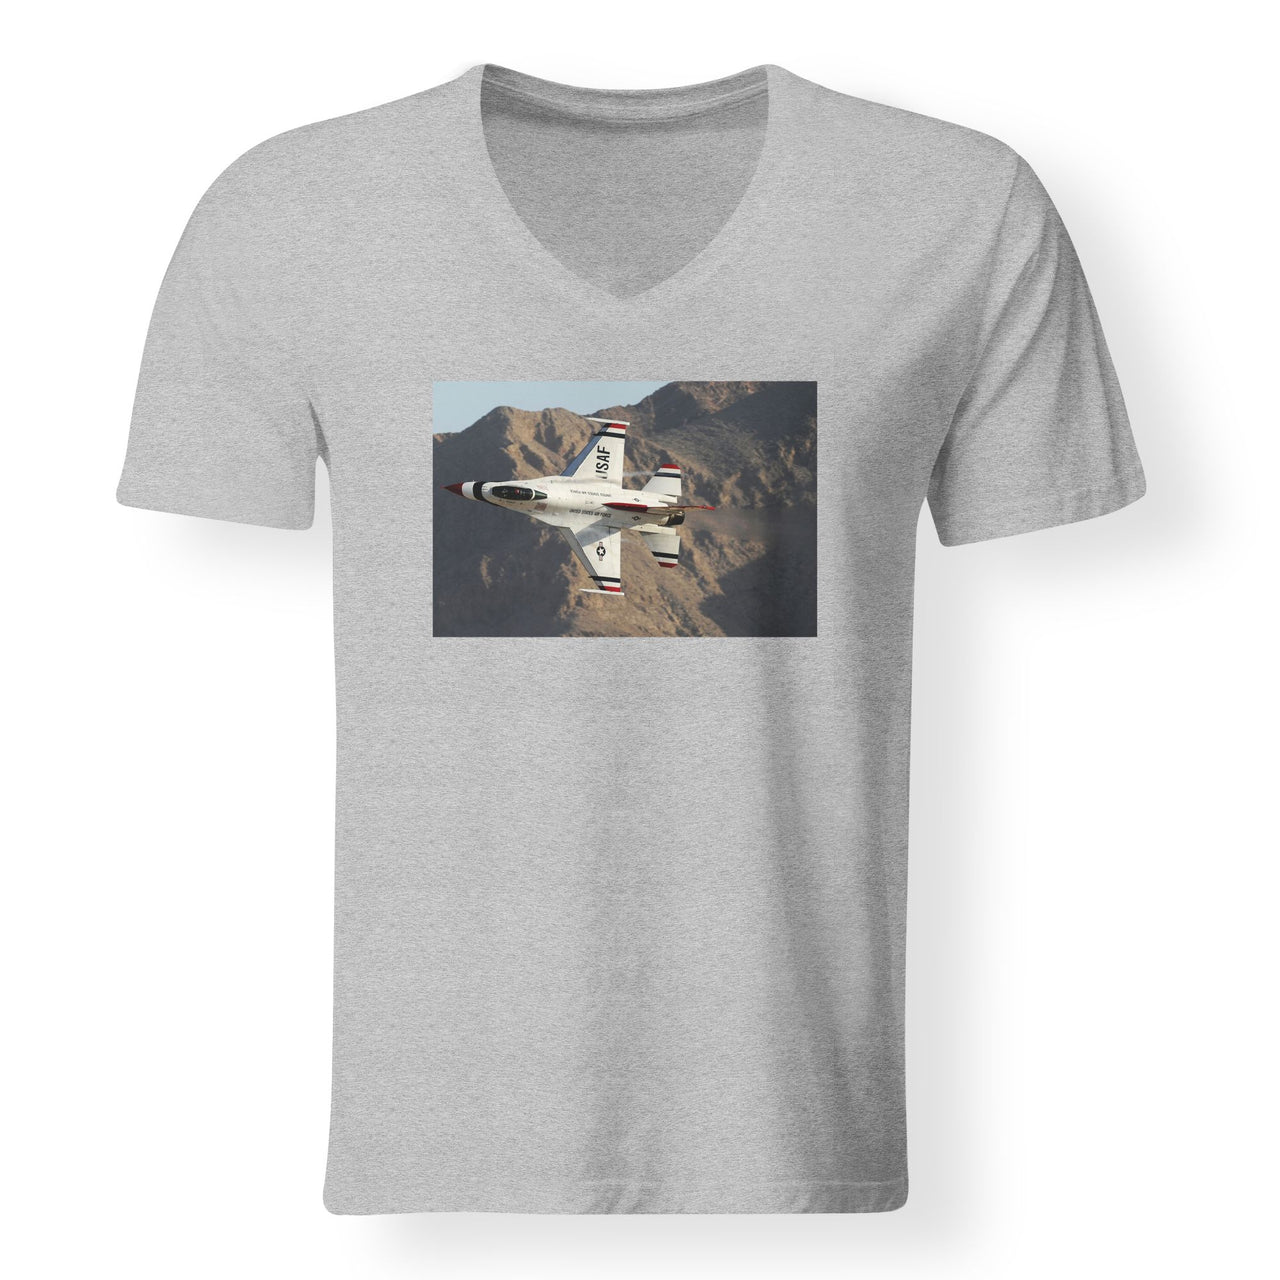 Amazing Show by Fighting Falcon F16 Designed V-Neck T-Shirts